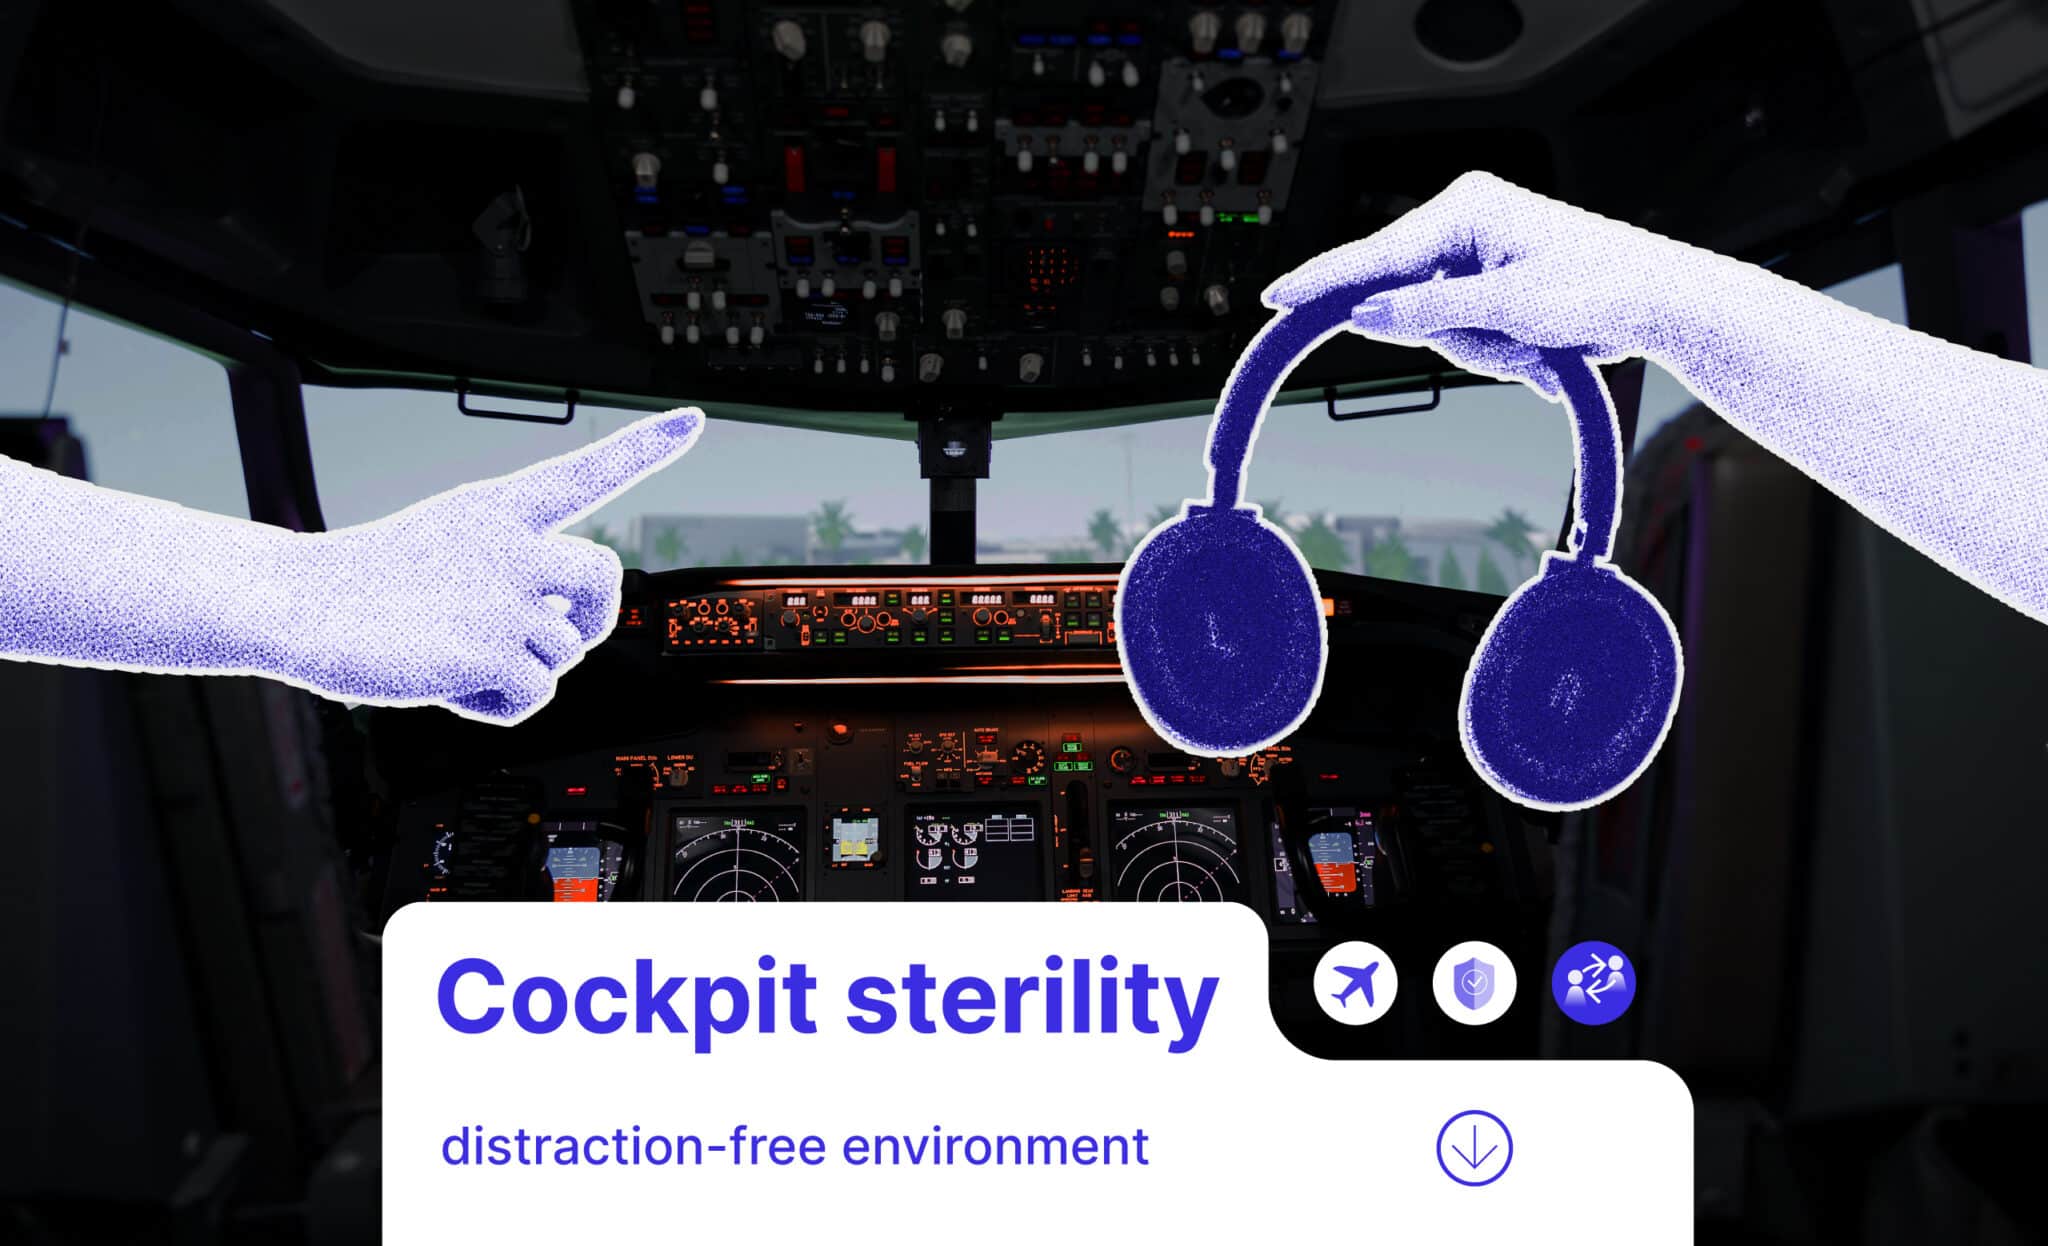 cockpit safety, cockpit sterility, distraction-free environment